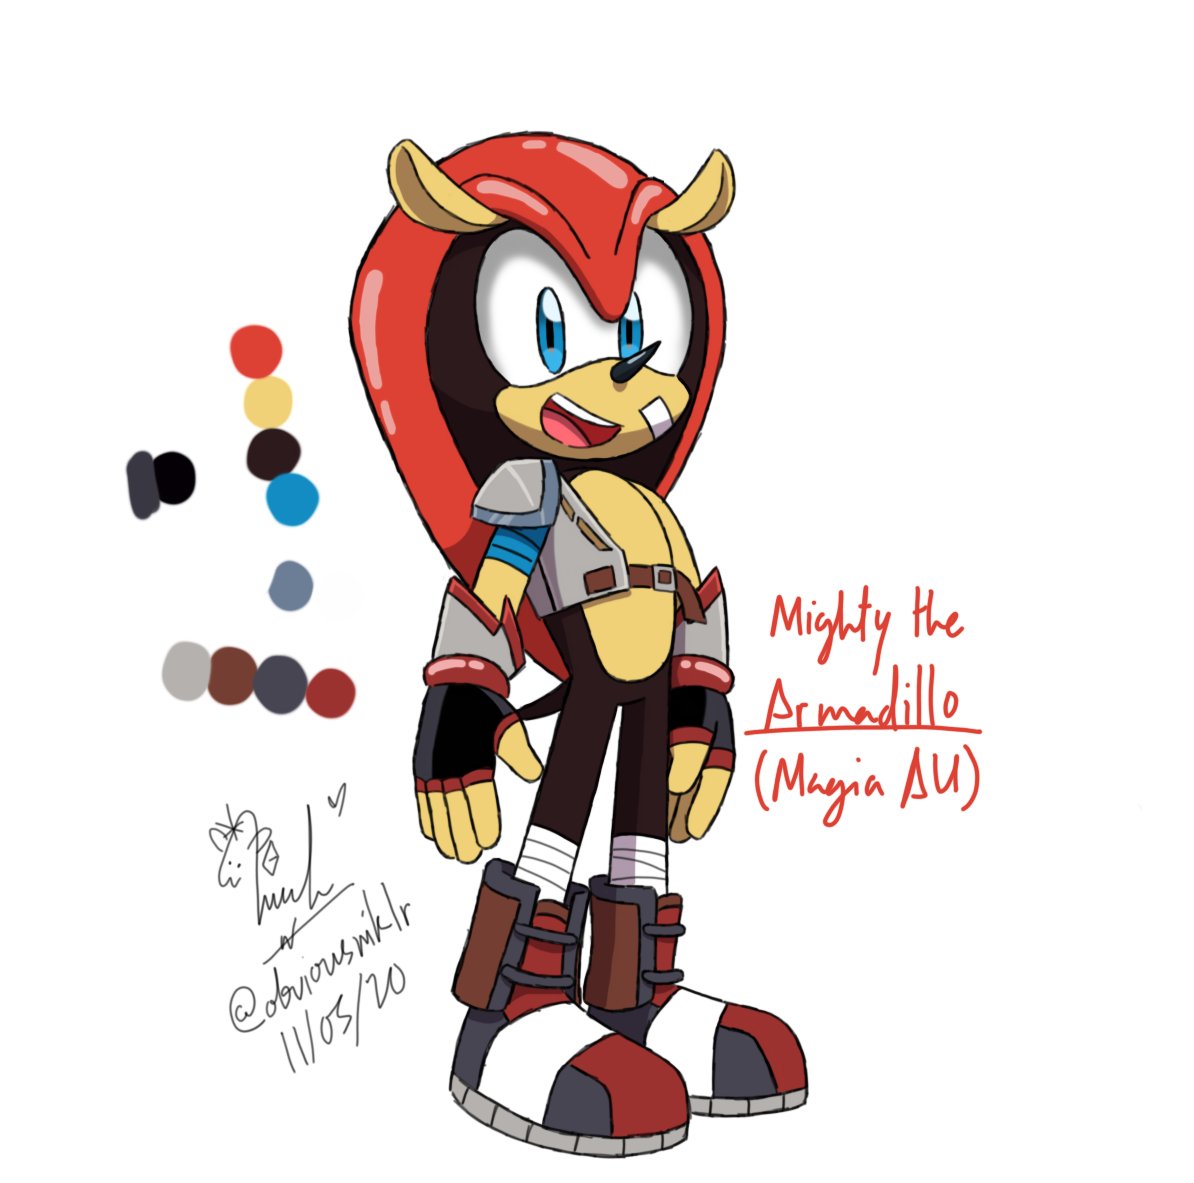 Niks on her college arc round II🐶🧡 on X: Mighty the Armadillo Magia AU  design I made and some sketches. #sonicoc #SonicFanCharacter #sonicfc  #originalcharacters #fanart #autodesksketchbook #drawing #sketch  #sketchbook #sonic #sonicau #mightythearmadillo